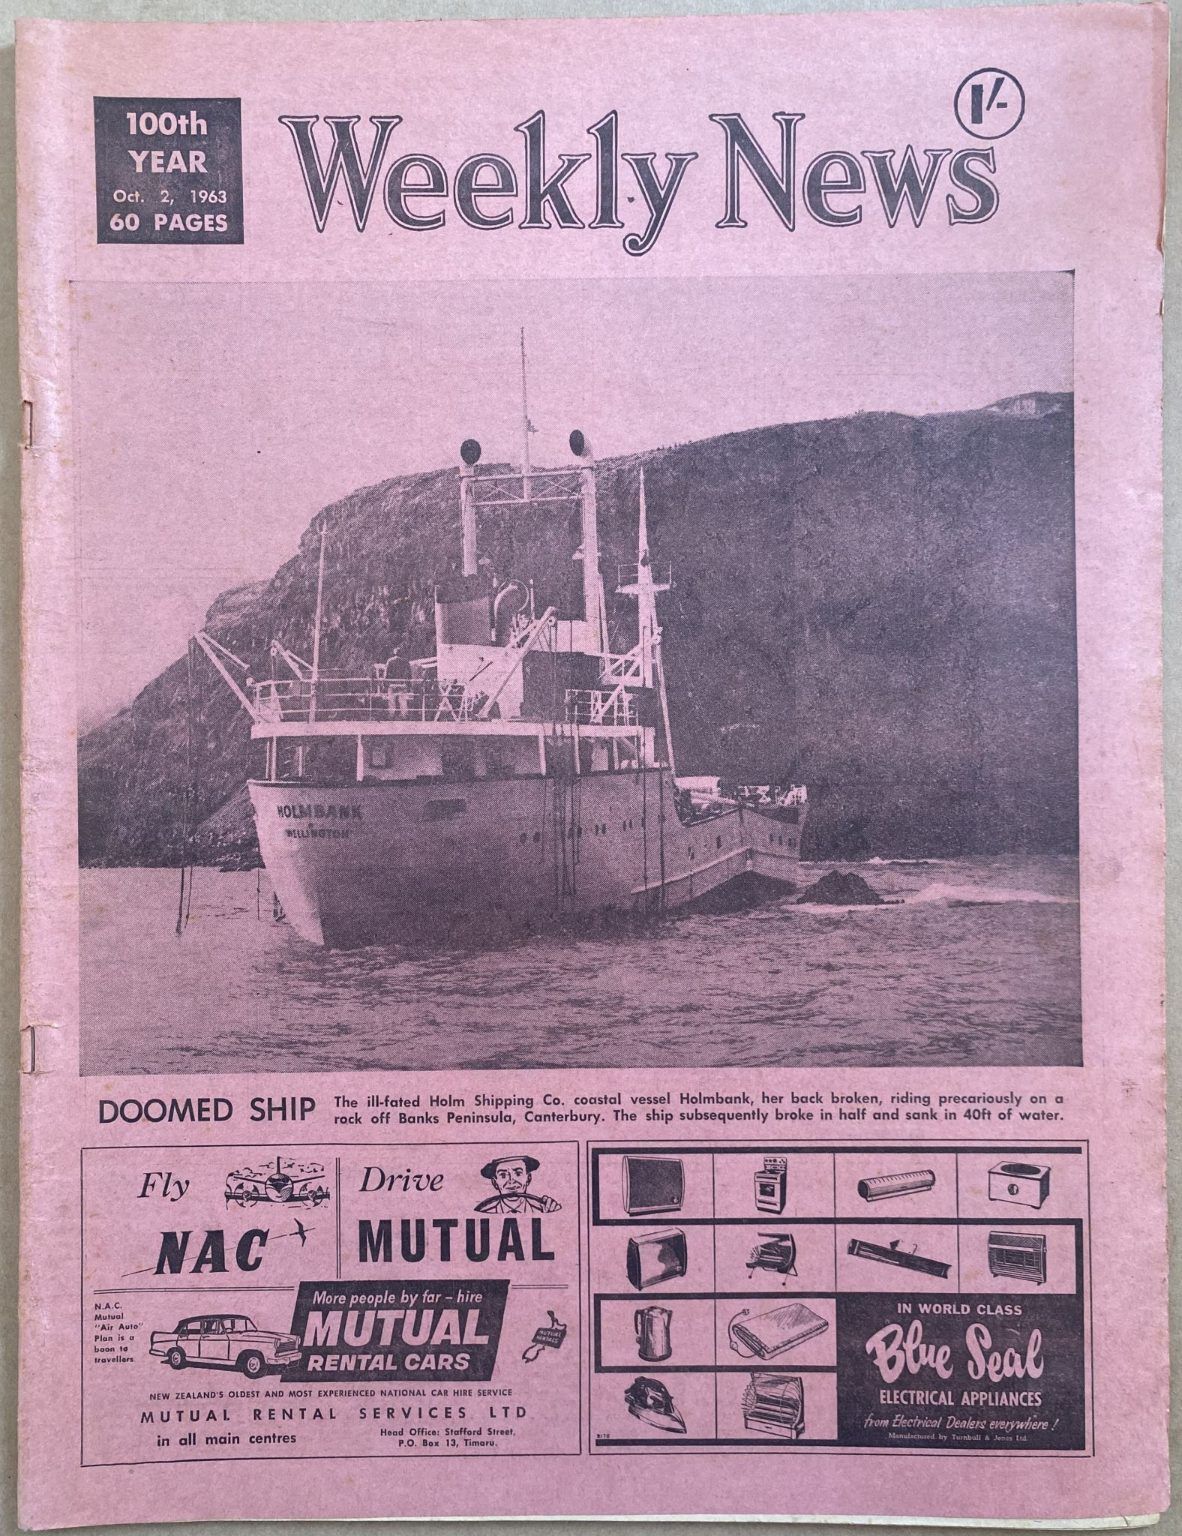 OLD NEWSPAPER: The Weekly News, No. 5210, 2 October 1963